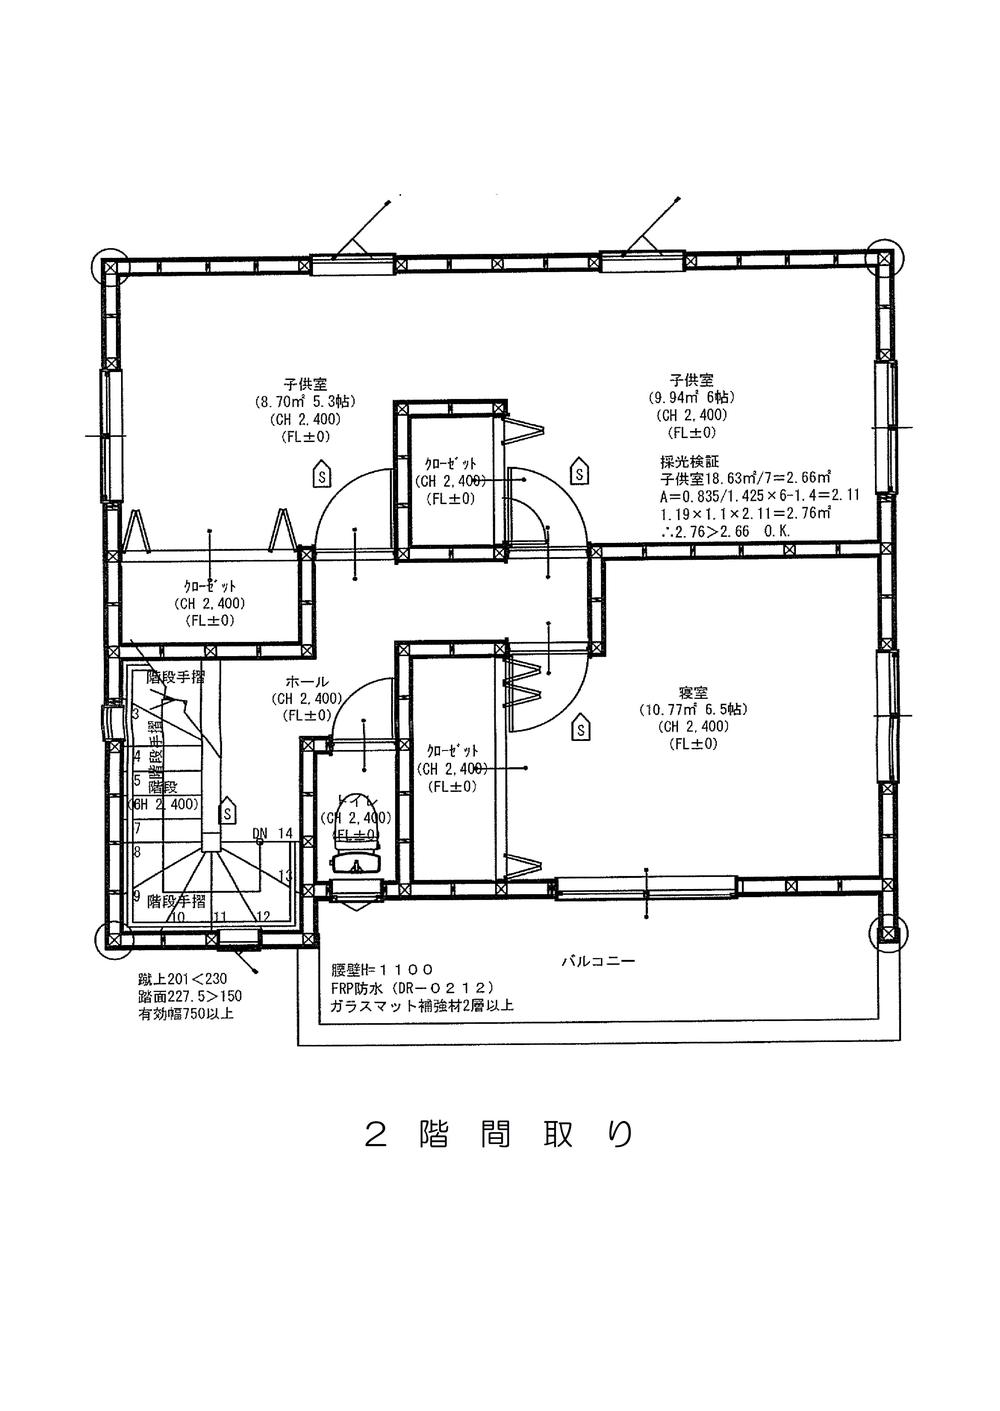 Other building plan example. Building plan example (F No. land) Building price 16 million yen, Building area 91.91 sq m